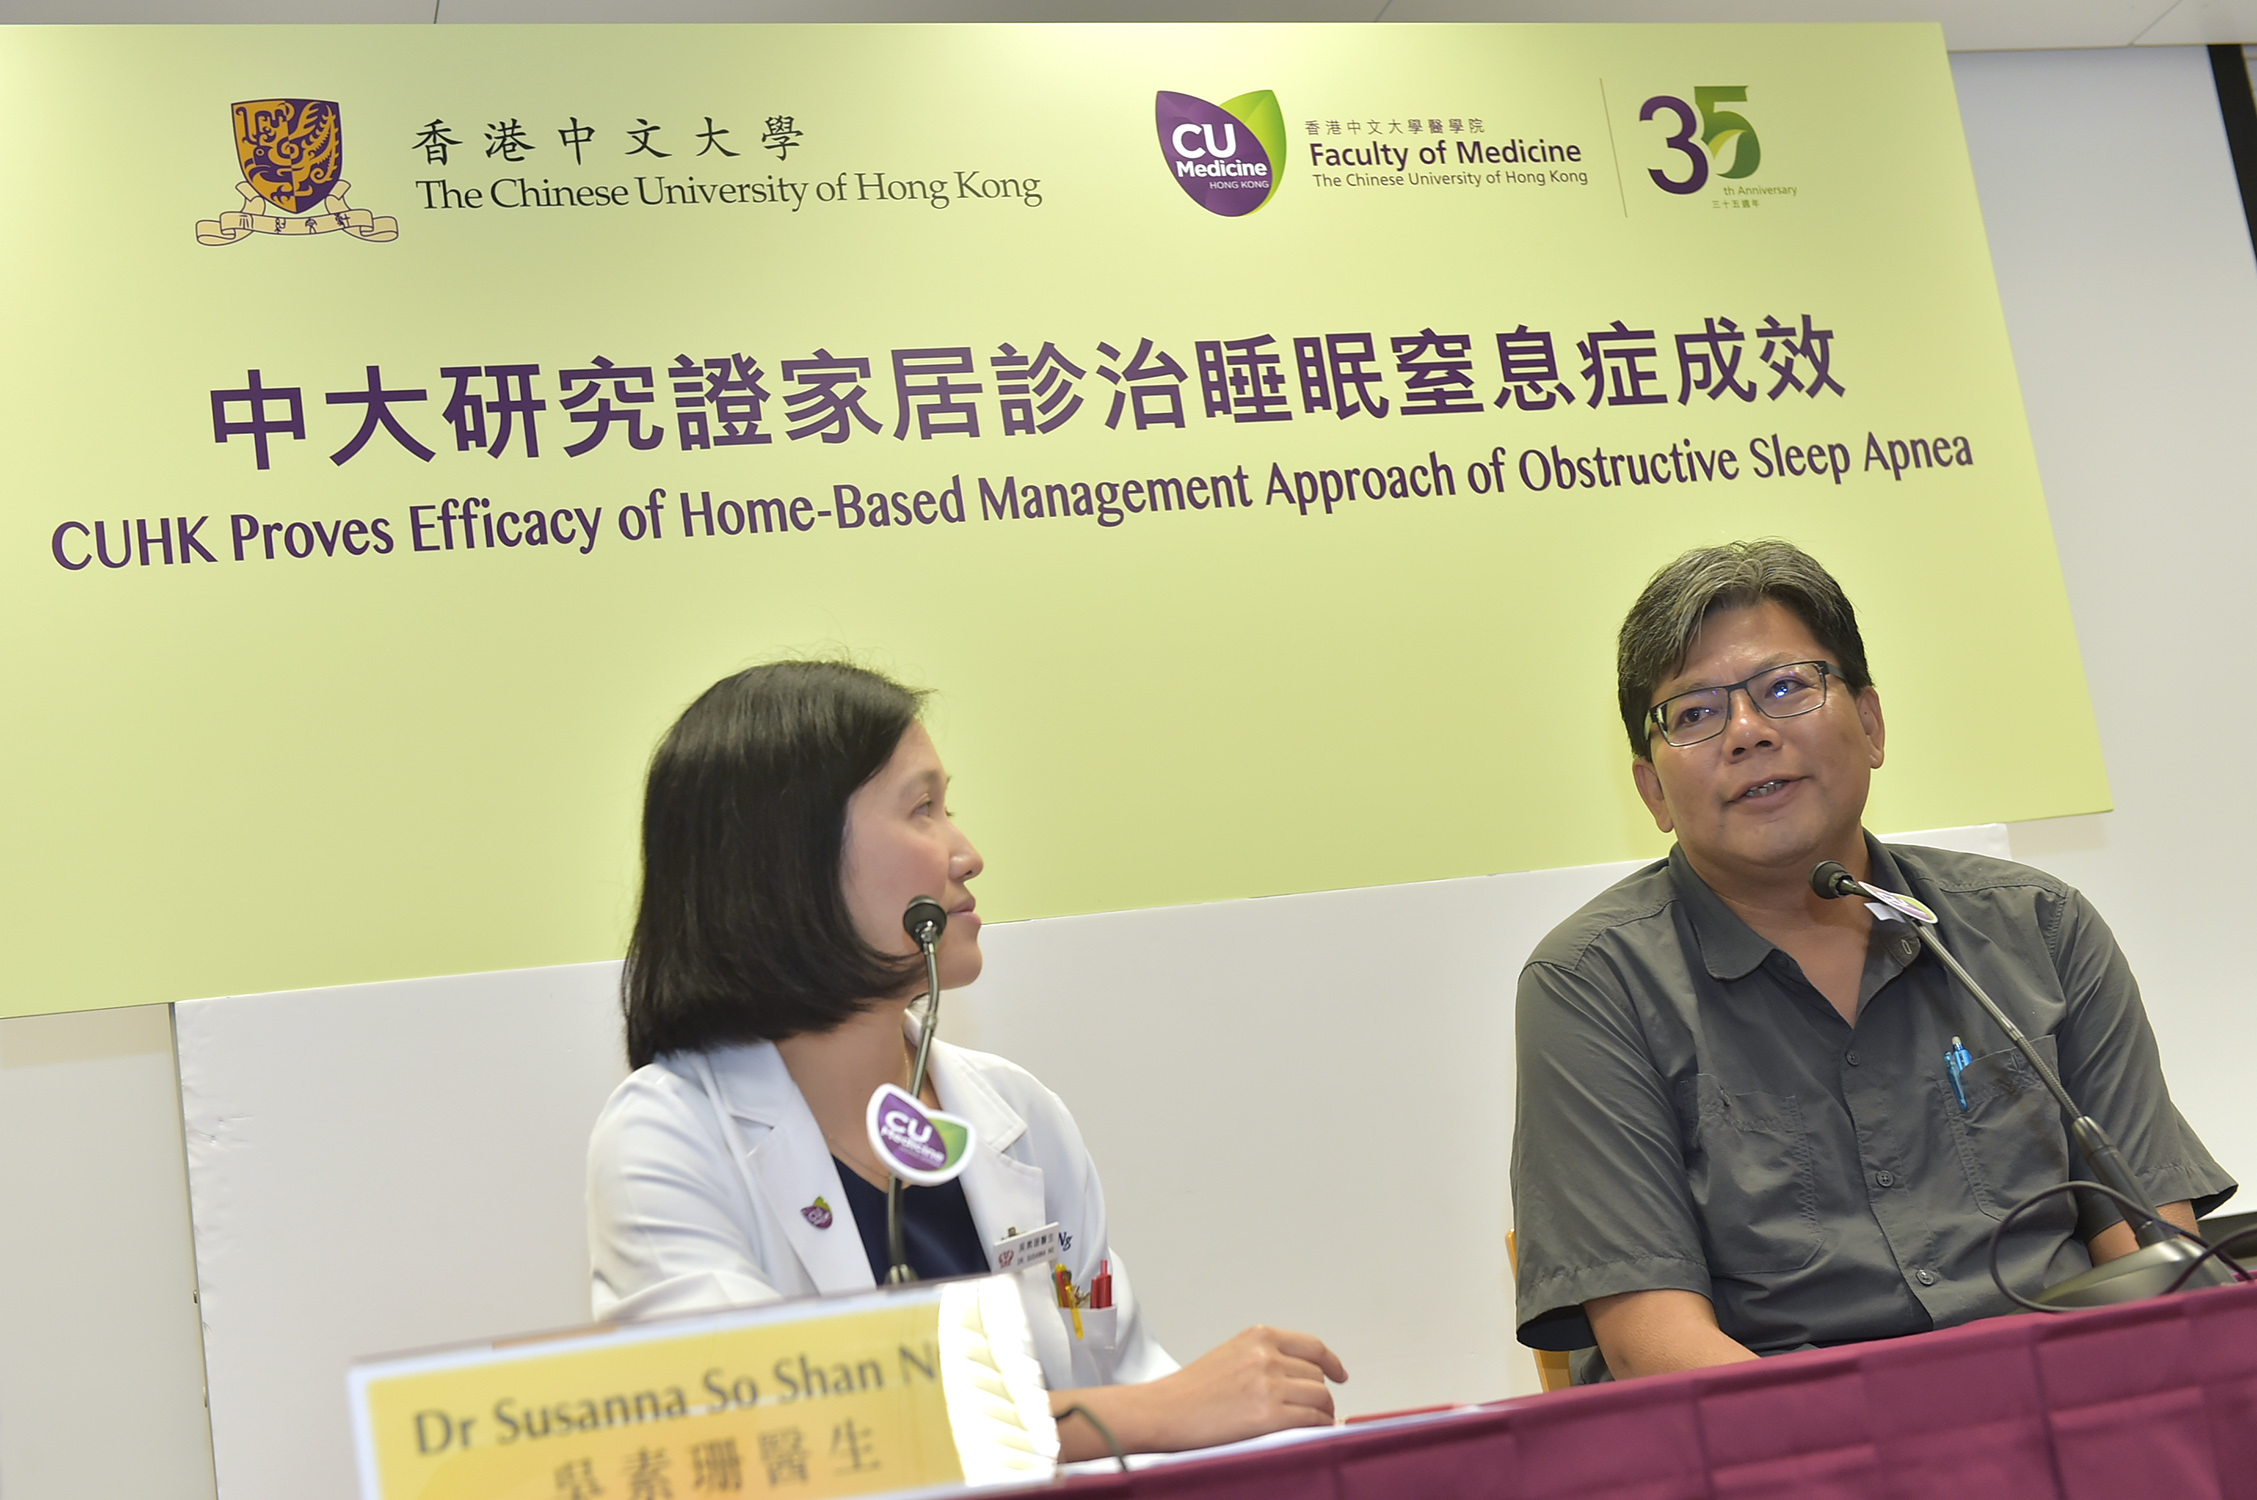 Mr Kong with severe OSA says his daytime sleepiness problem has been eased after continuous positive airway pressure (CPAP) treatment. His sleep quality has also been improved.